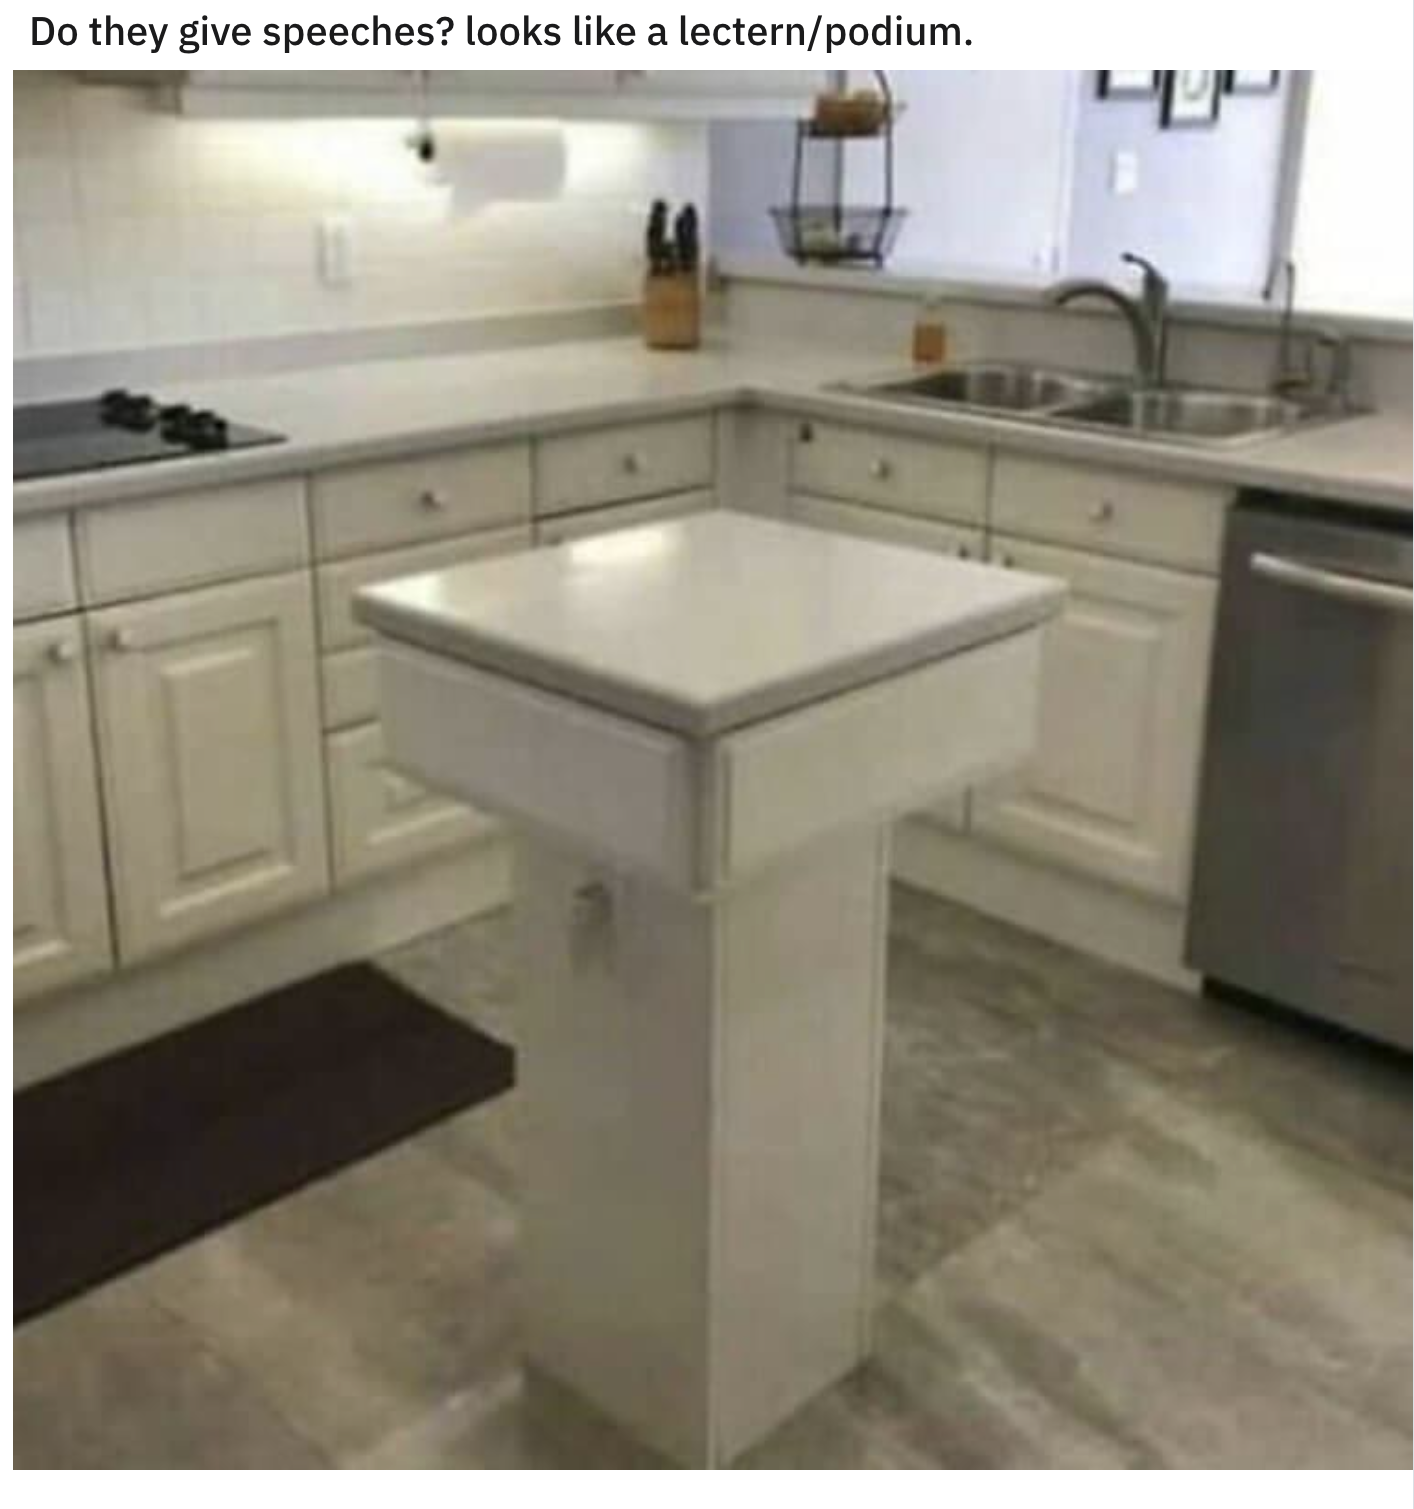 podium in the middle of the kitchen